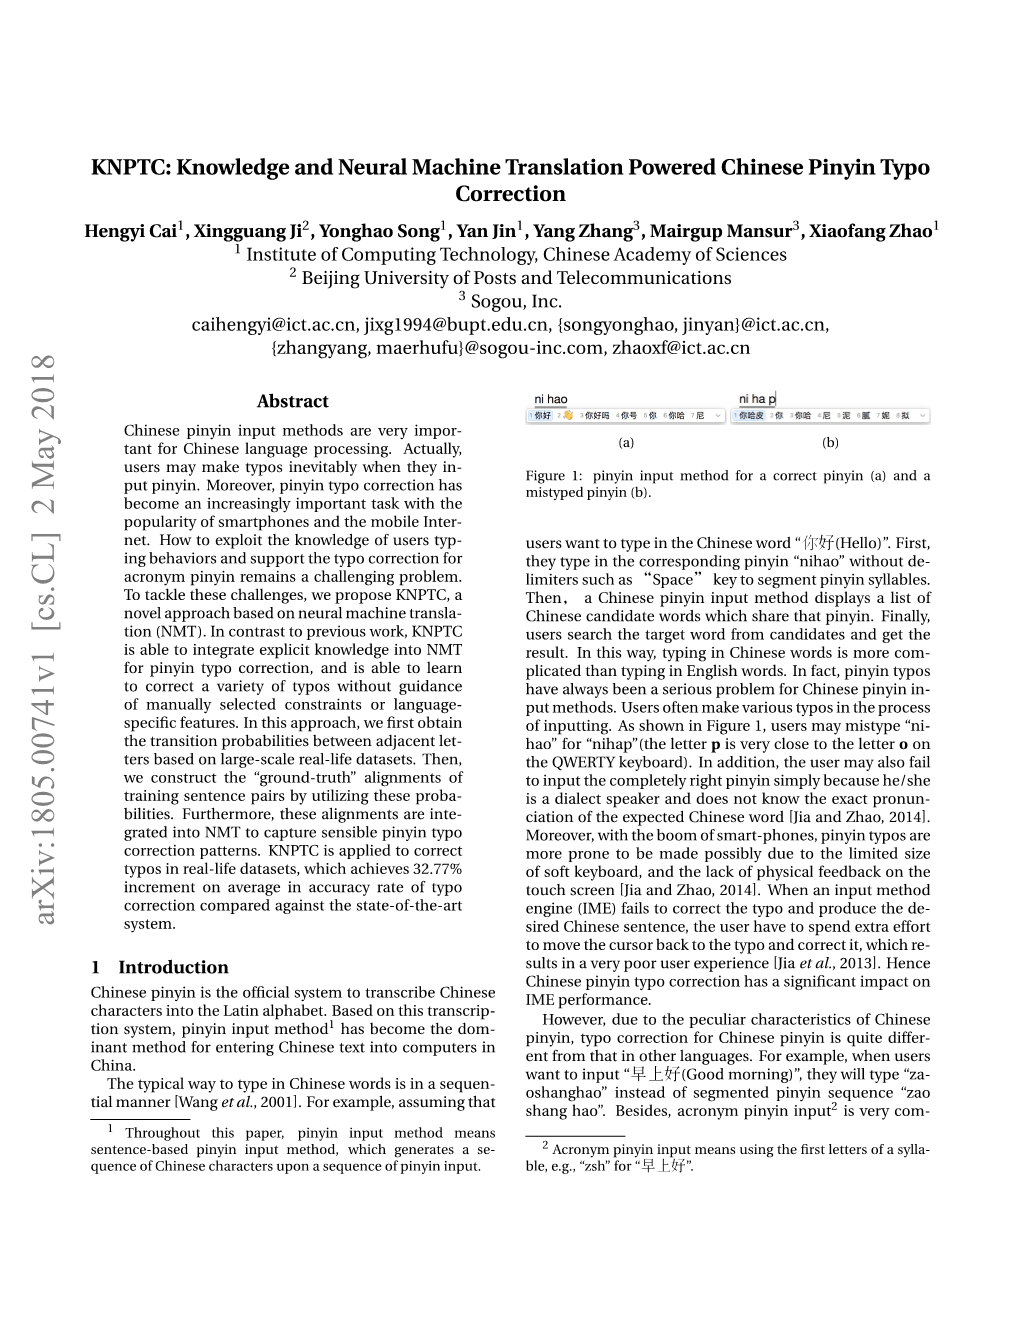 KNPTC: Knowledge and Neural Machine Translation Powered Chinese Pinyin Typo Correction